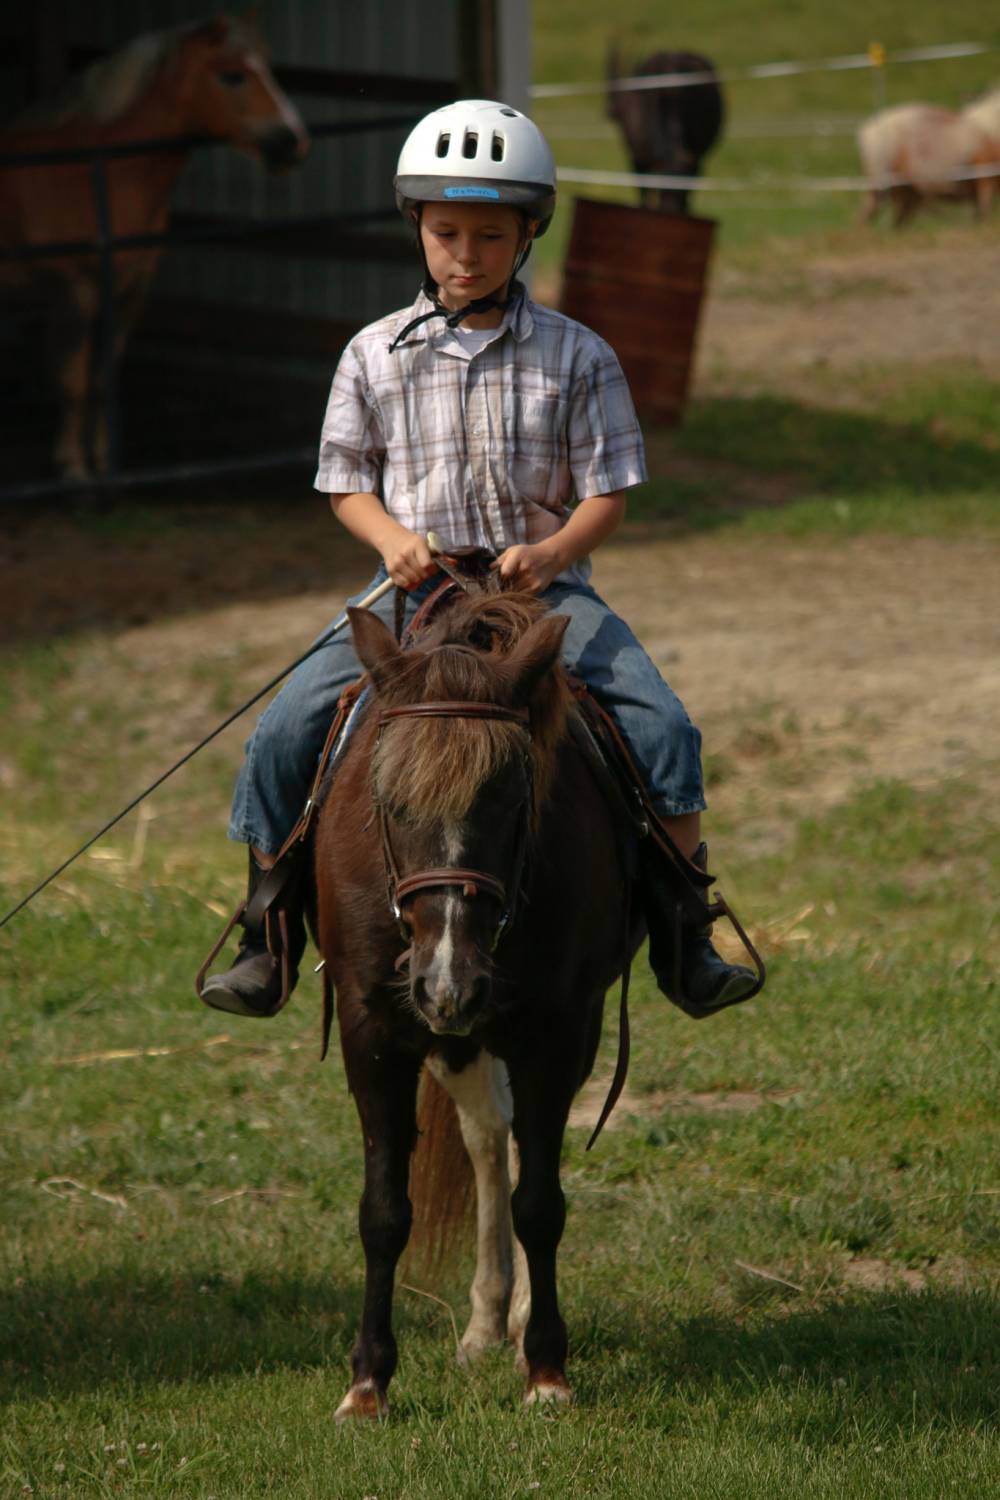 TOP PENNSYLVANIA SPORTS CAMP: Fairview Farm and Guest Ranch - Rough Riders Girl s Camp is a Top Sports Summer Camp located in Granville Summit Pennsylvania offering many fun and enriching Sports and other camp programs. 